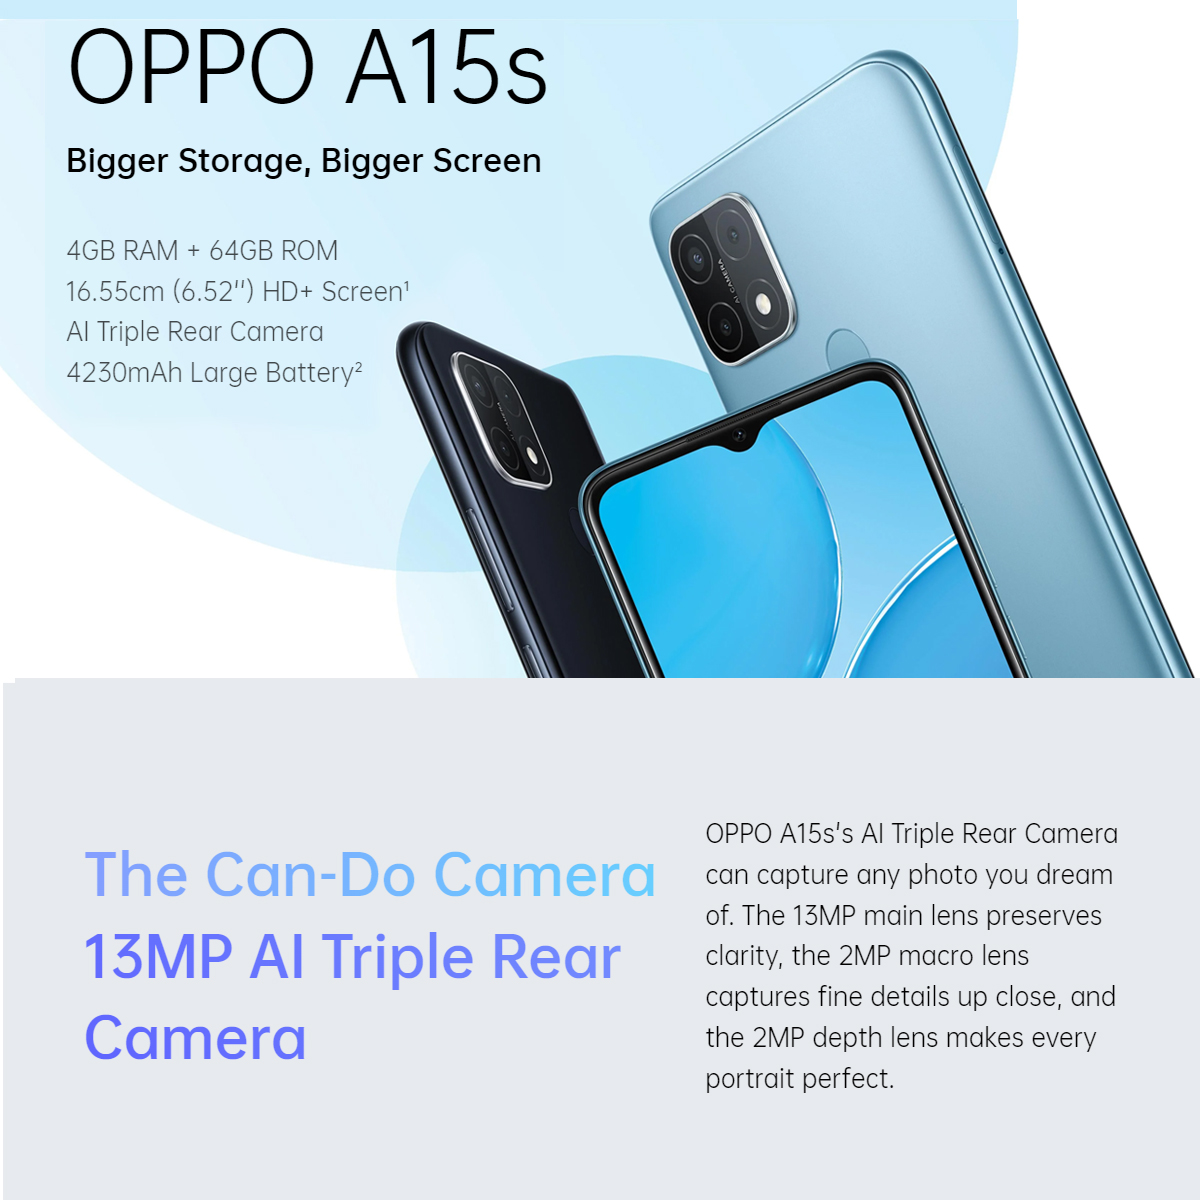 Yappe Store - OPPO A15s is back! With a larger capacity of